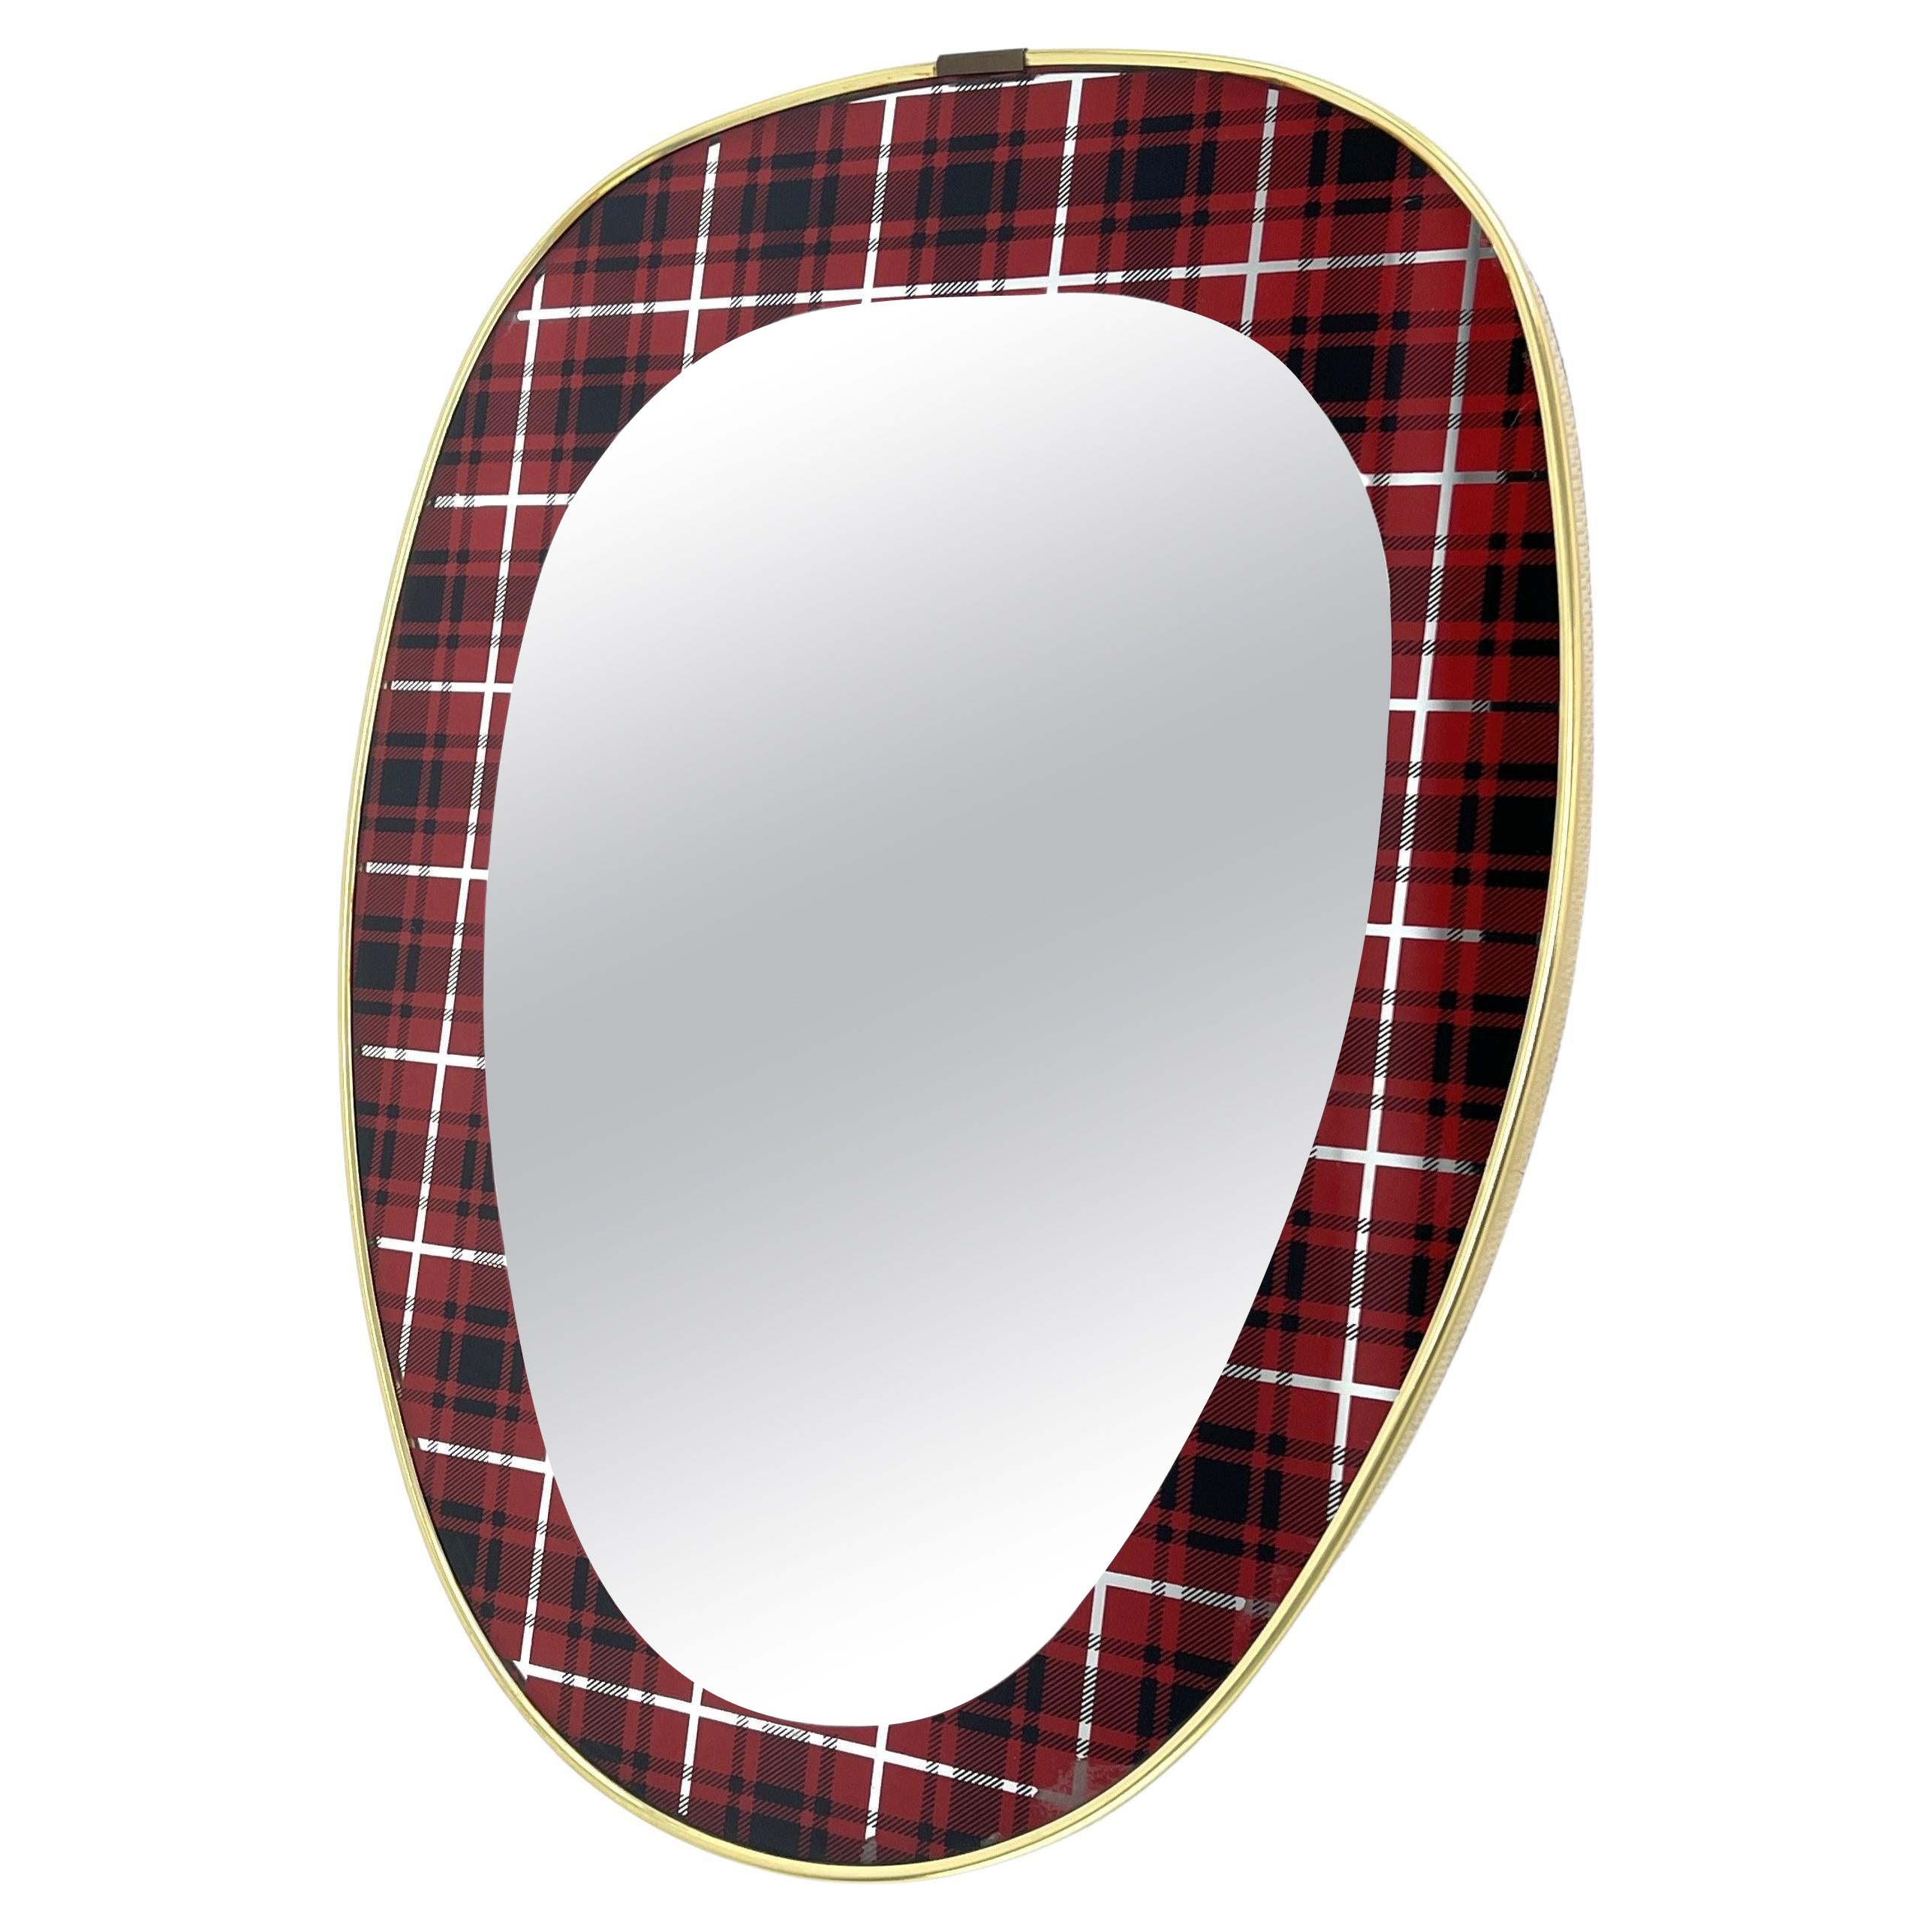 Vintage Wall Mirror in Kidney Shape with Wide Red Checkered Edge, 1950s